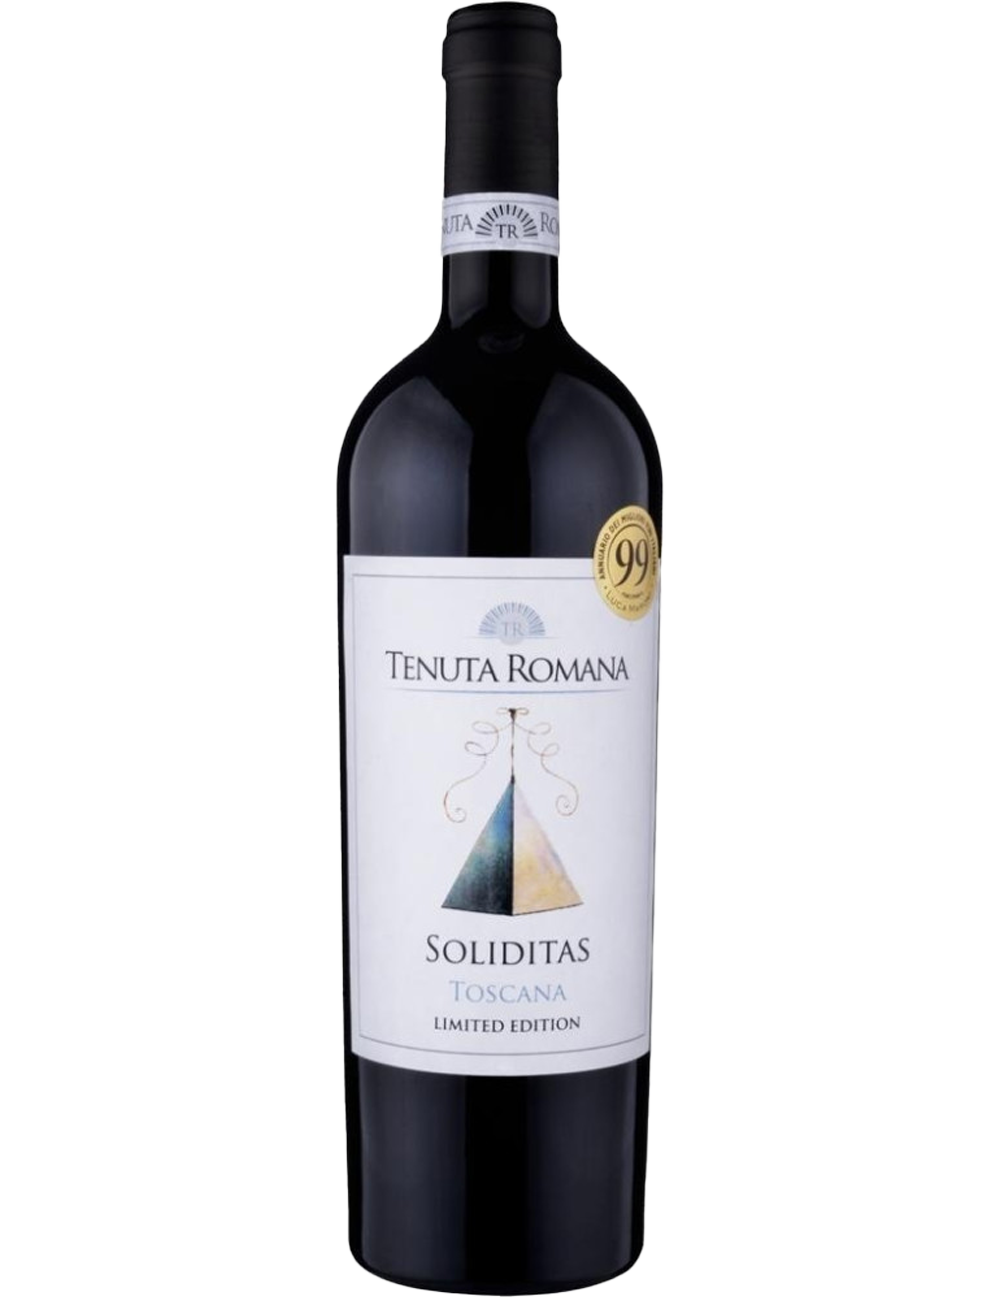 Soliditas Toscana Limited Edition IGT